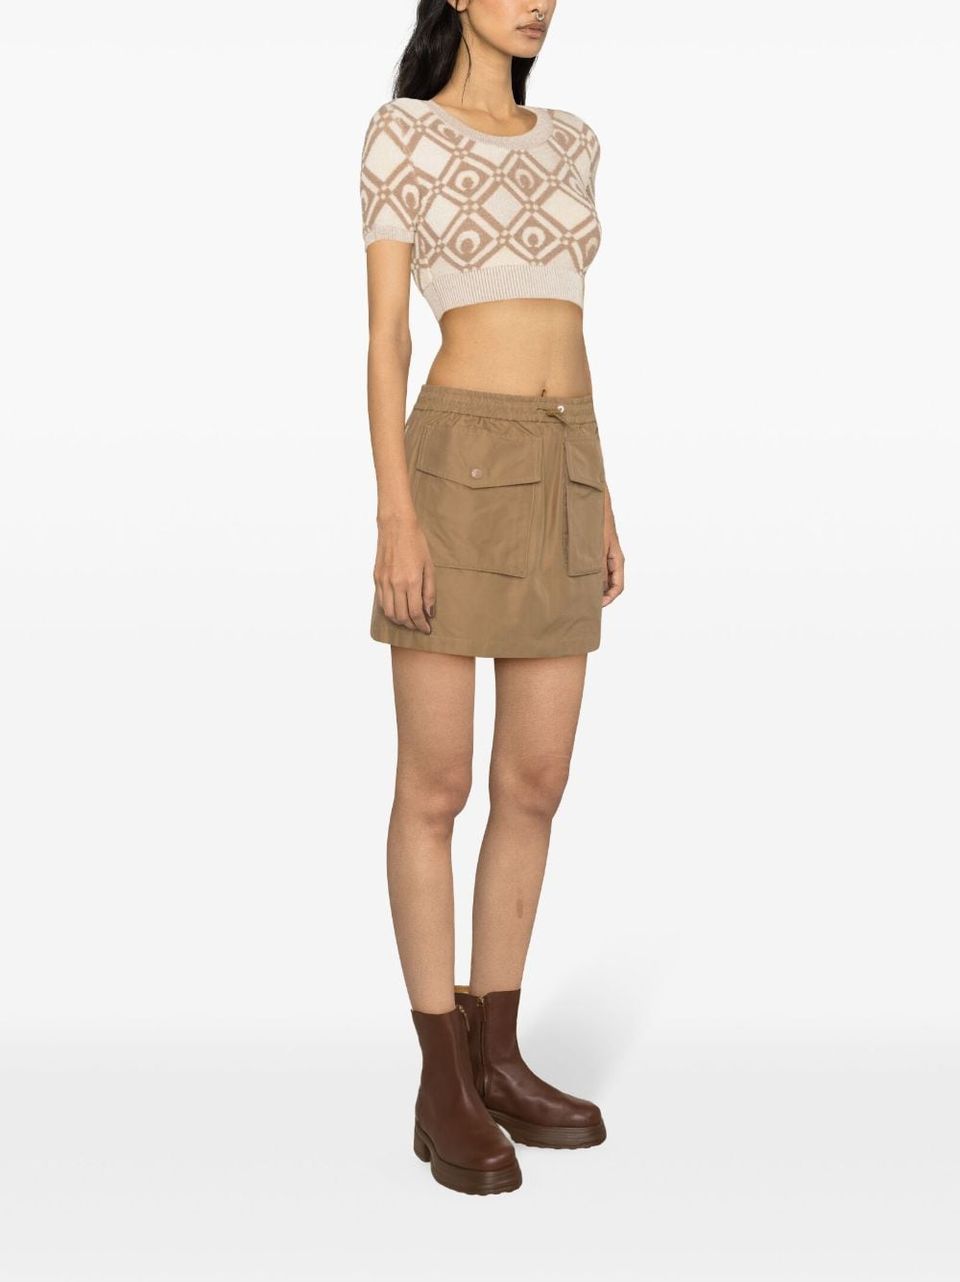 Skirt with cargo pockets